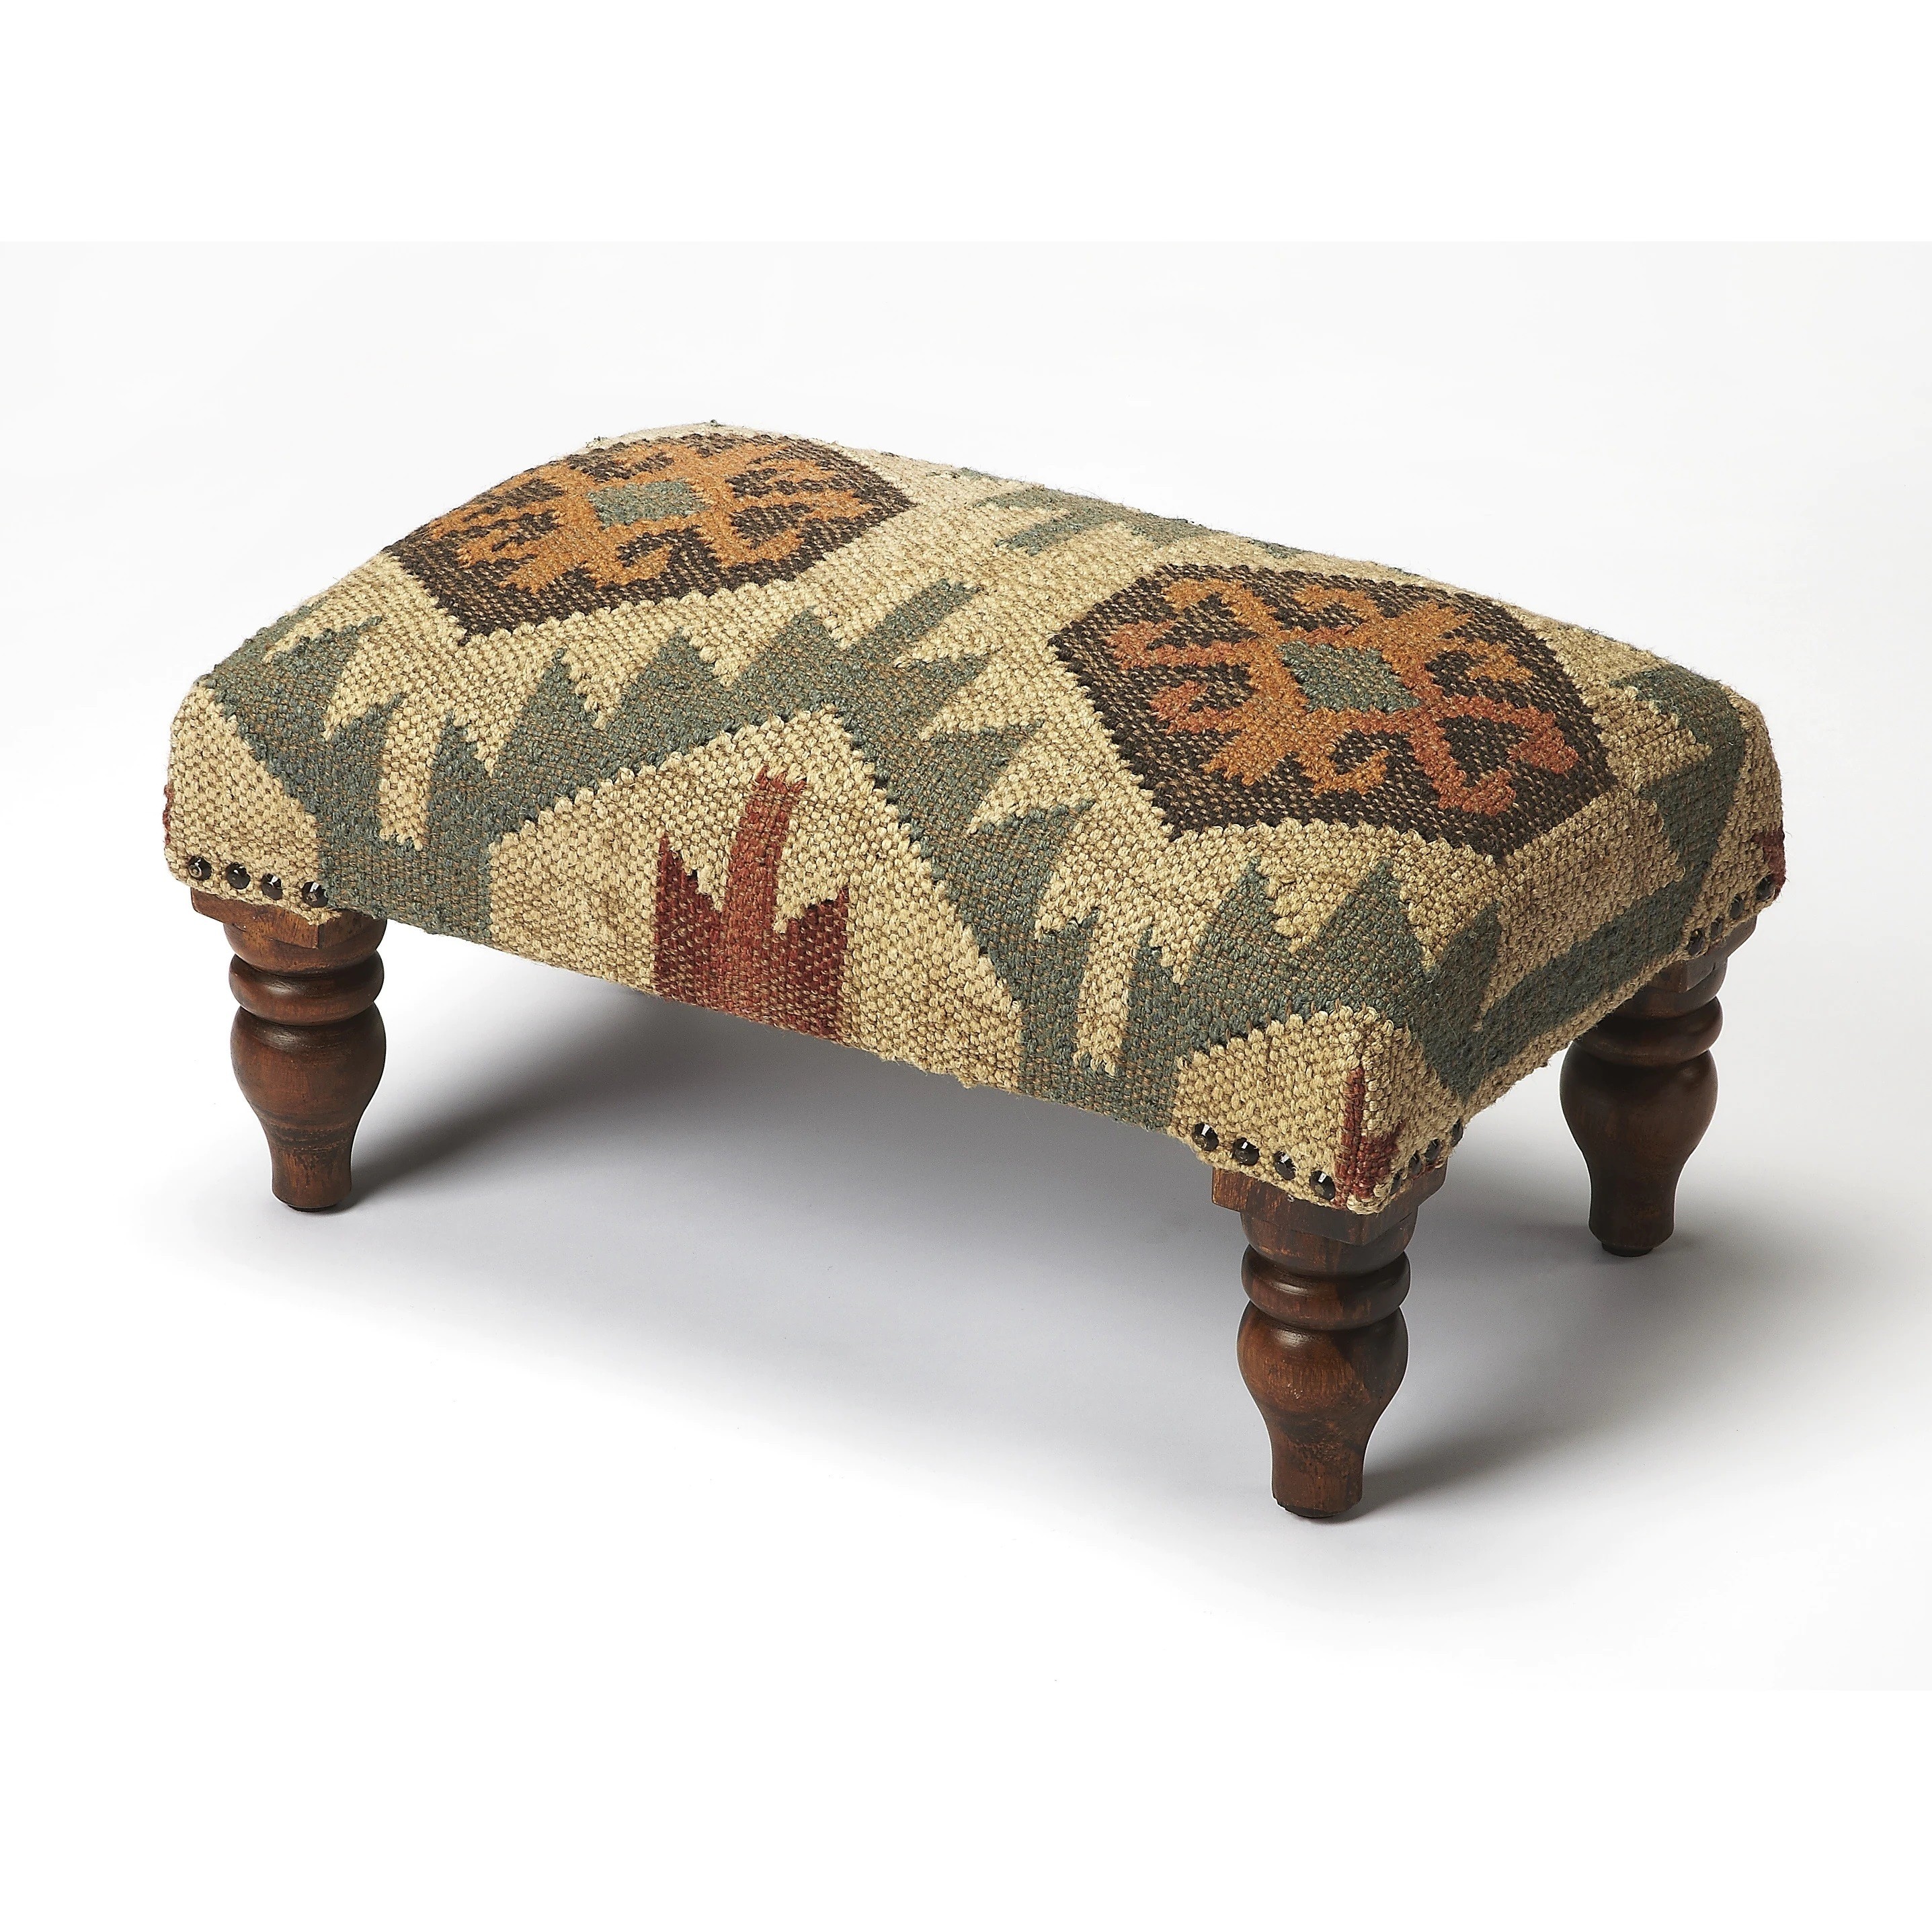 Low footstool in a bold color